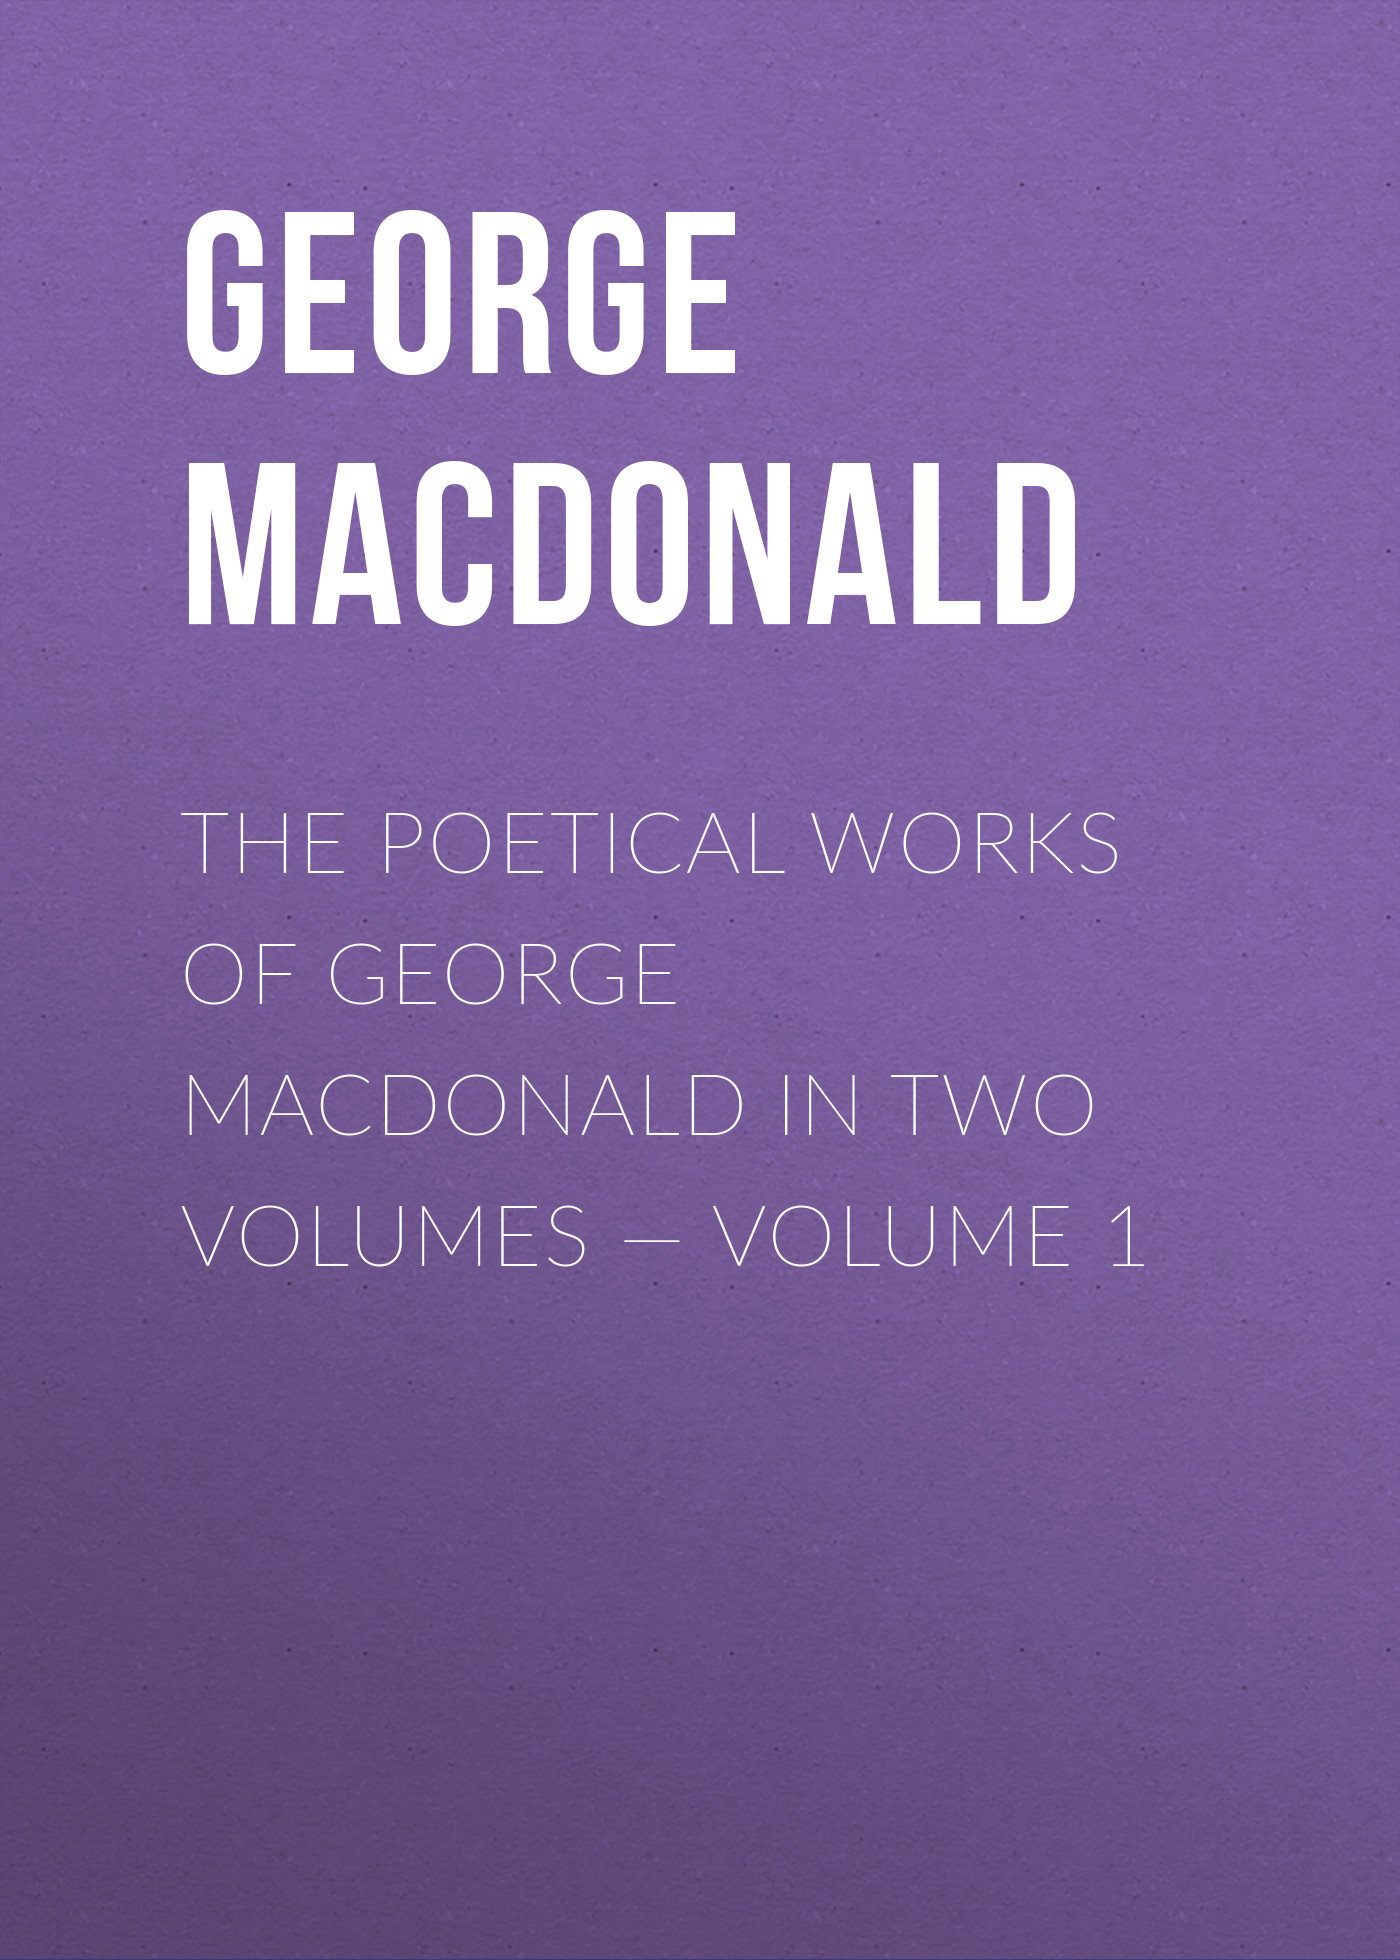 The poetical works of George MacDonald in two volumes— Volume 1